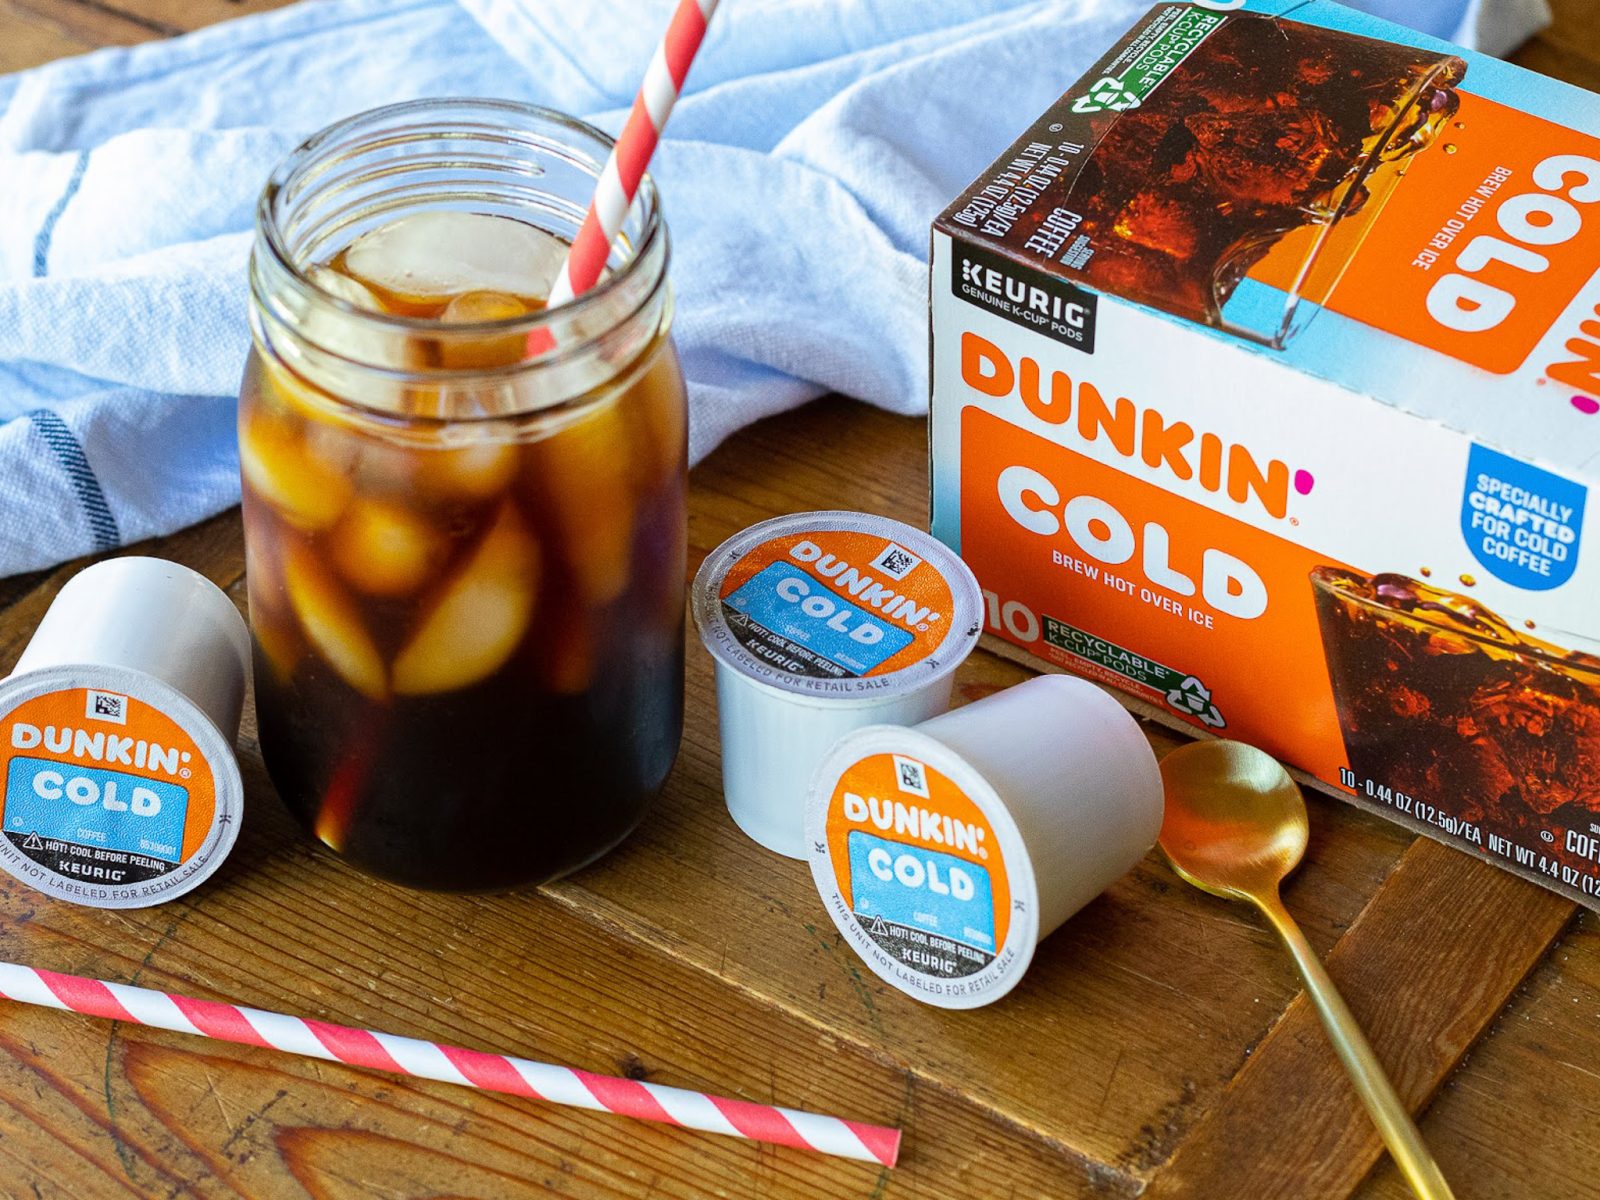 Dunkin’ Donuts Cold Coffee Products Just $1.99 At Publix (Regular Price $10.79)